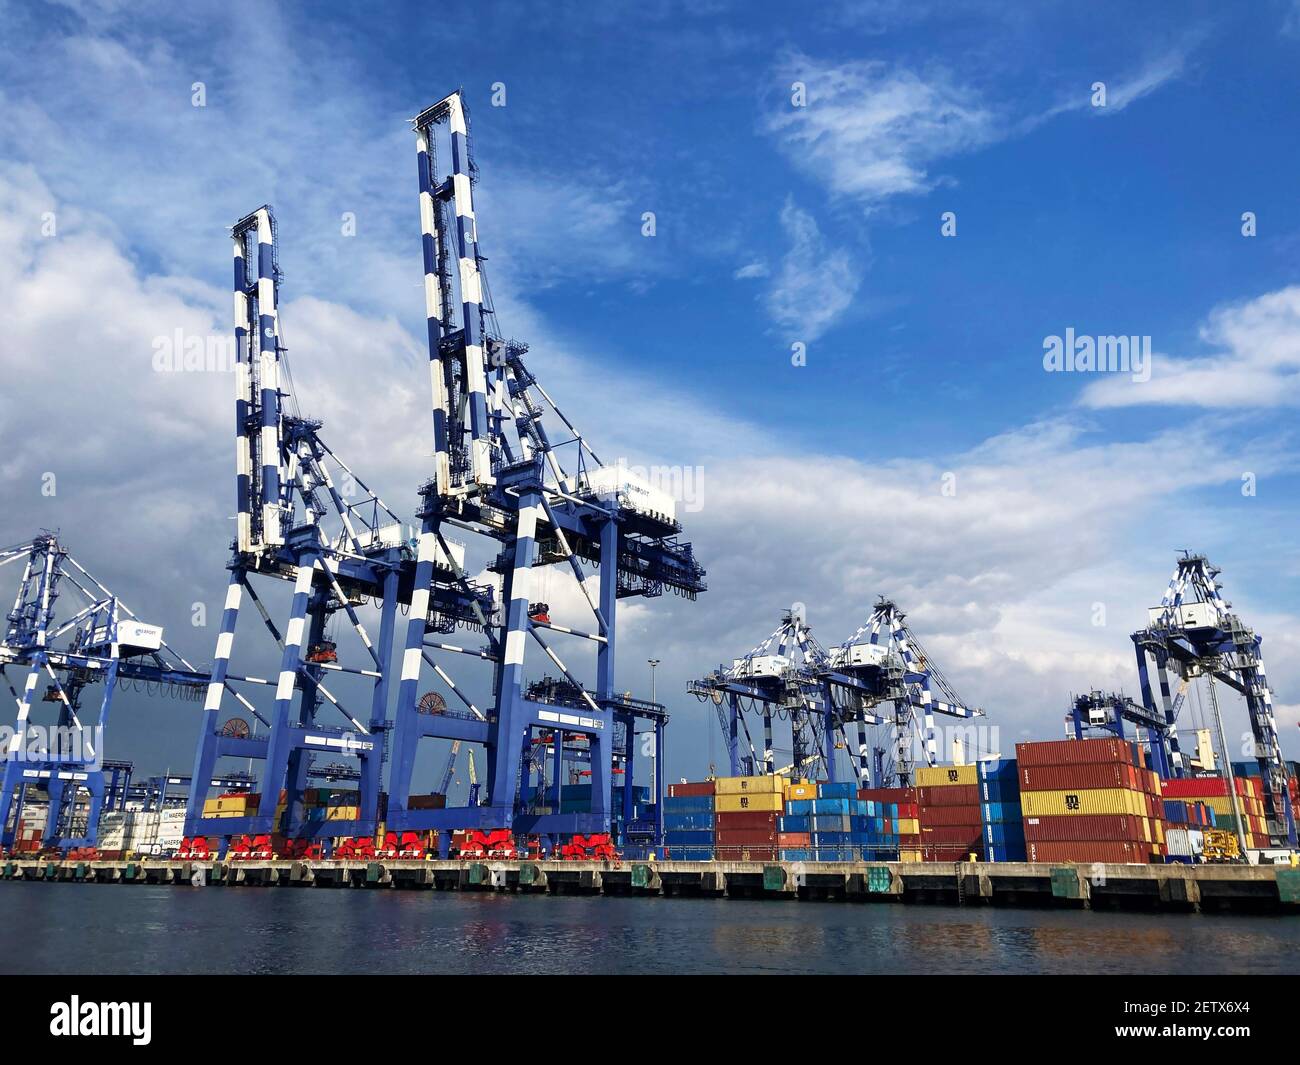 view from ambarli international harbor containers loading ships Stock Photo